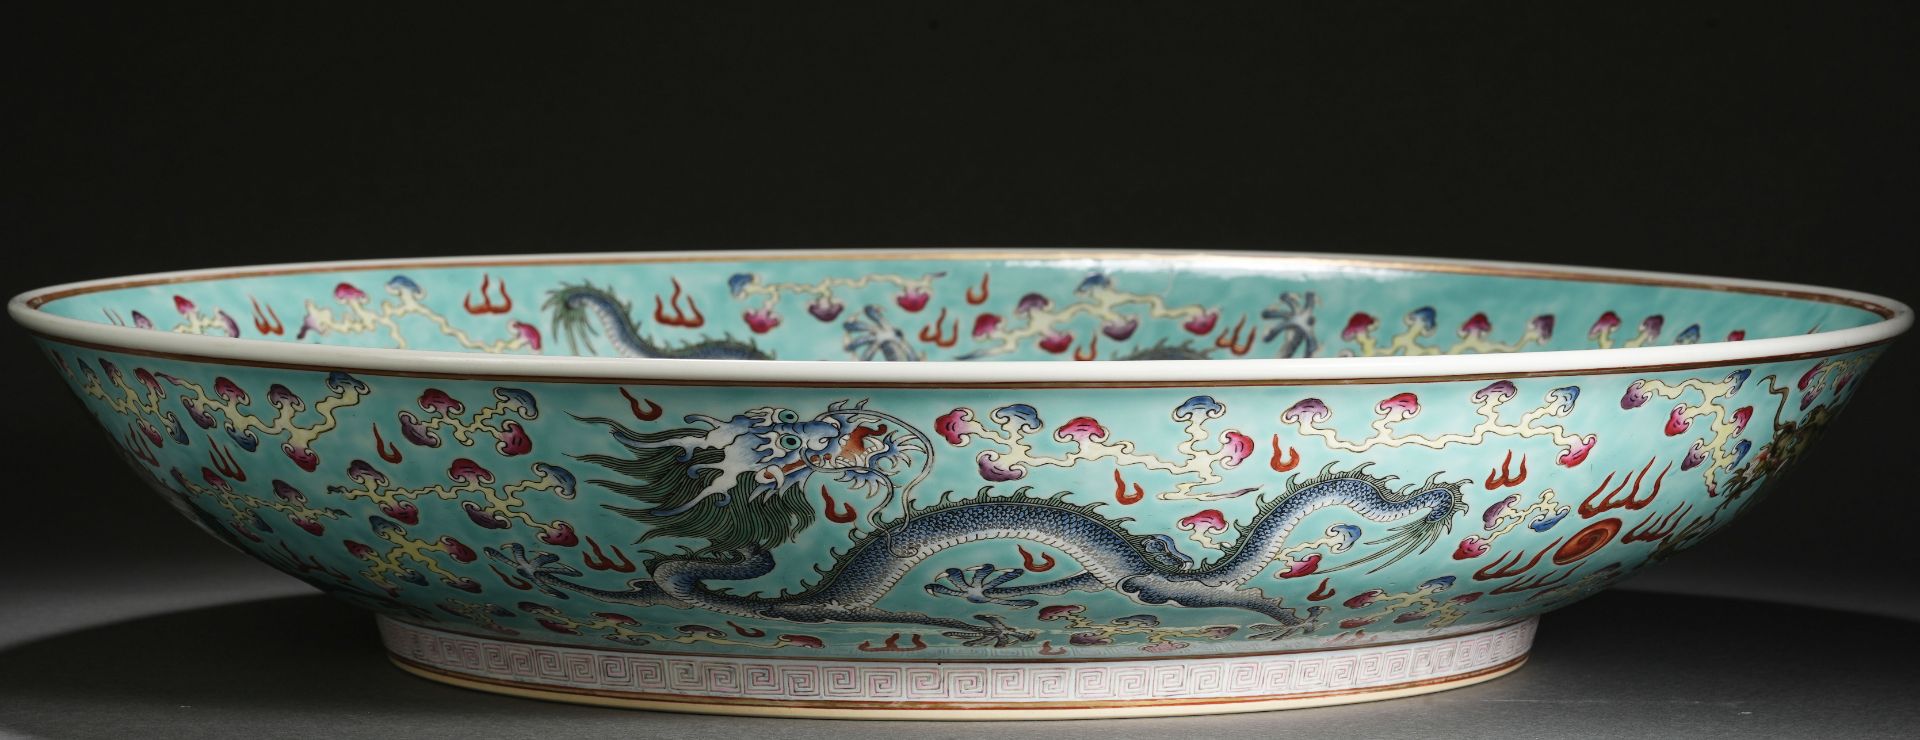 A Chinese Famille Rose Dragon Plate - Image 10 of 18